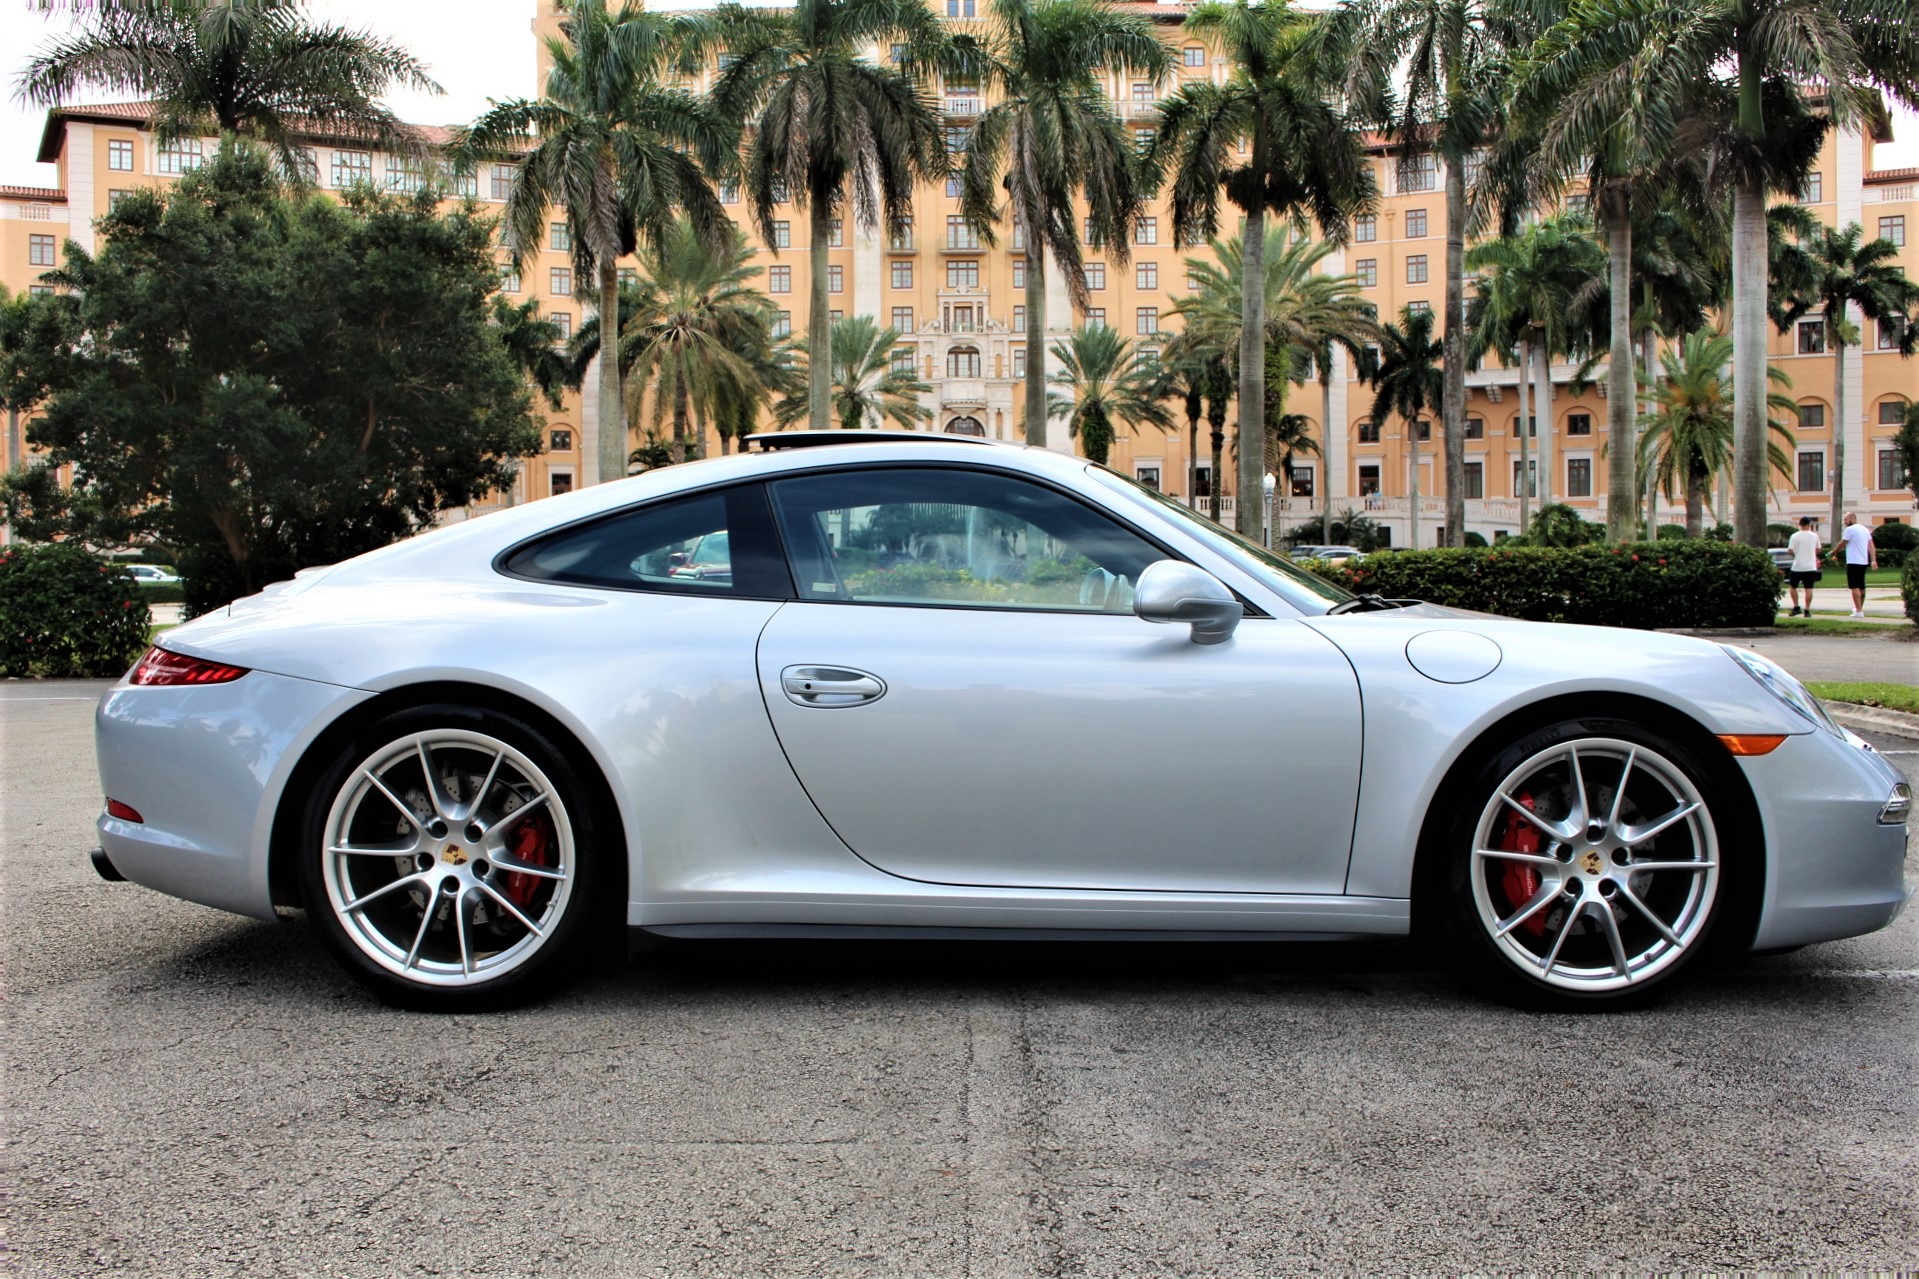 Used 2014 Porsche 911 Carrera 4S for sale Sold at The Gables Sports Cars in Miami FL 33146 1